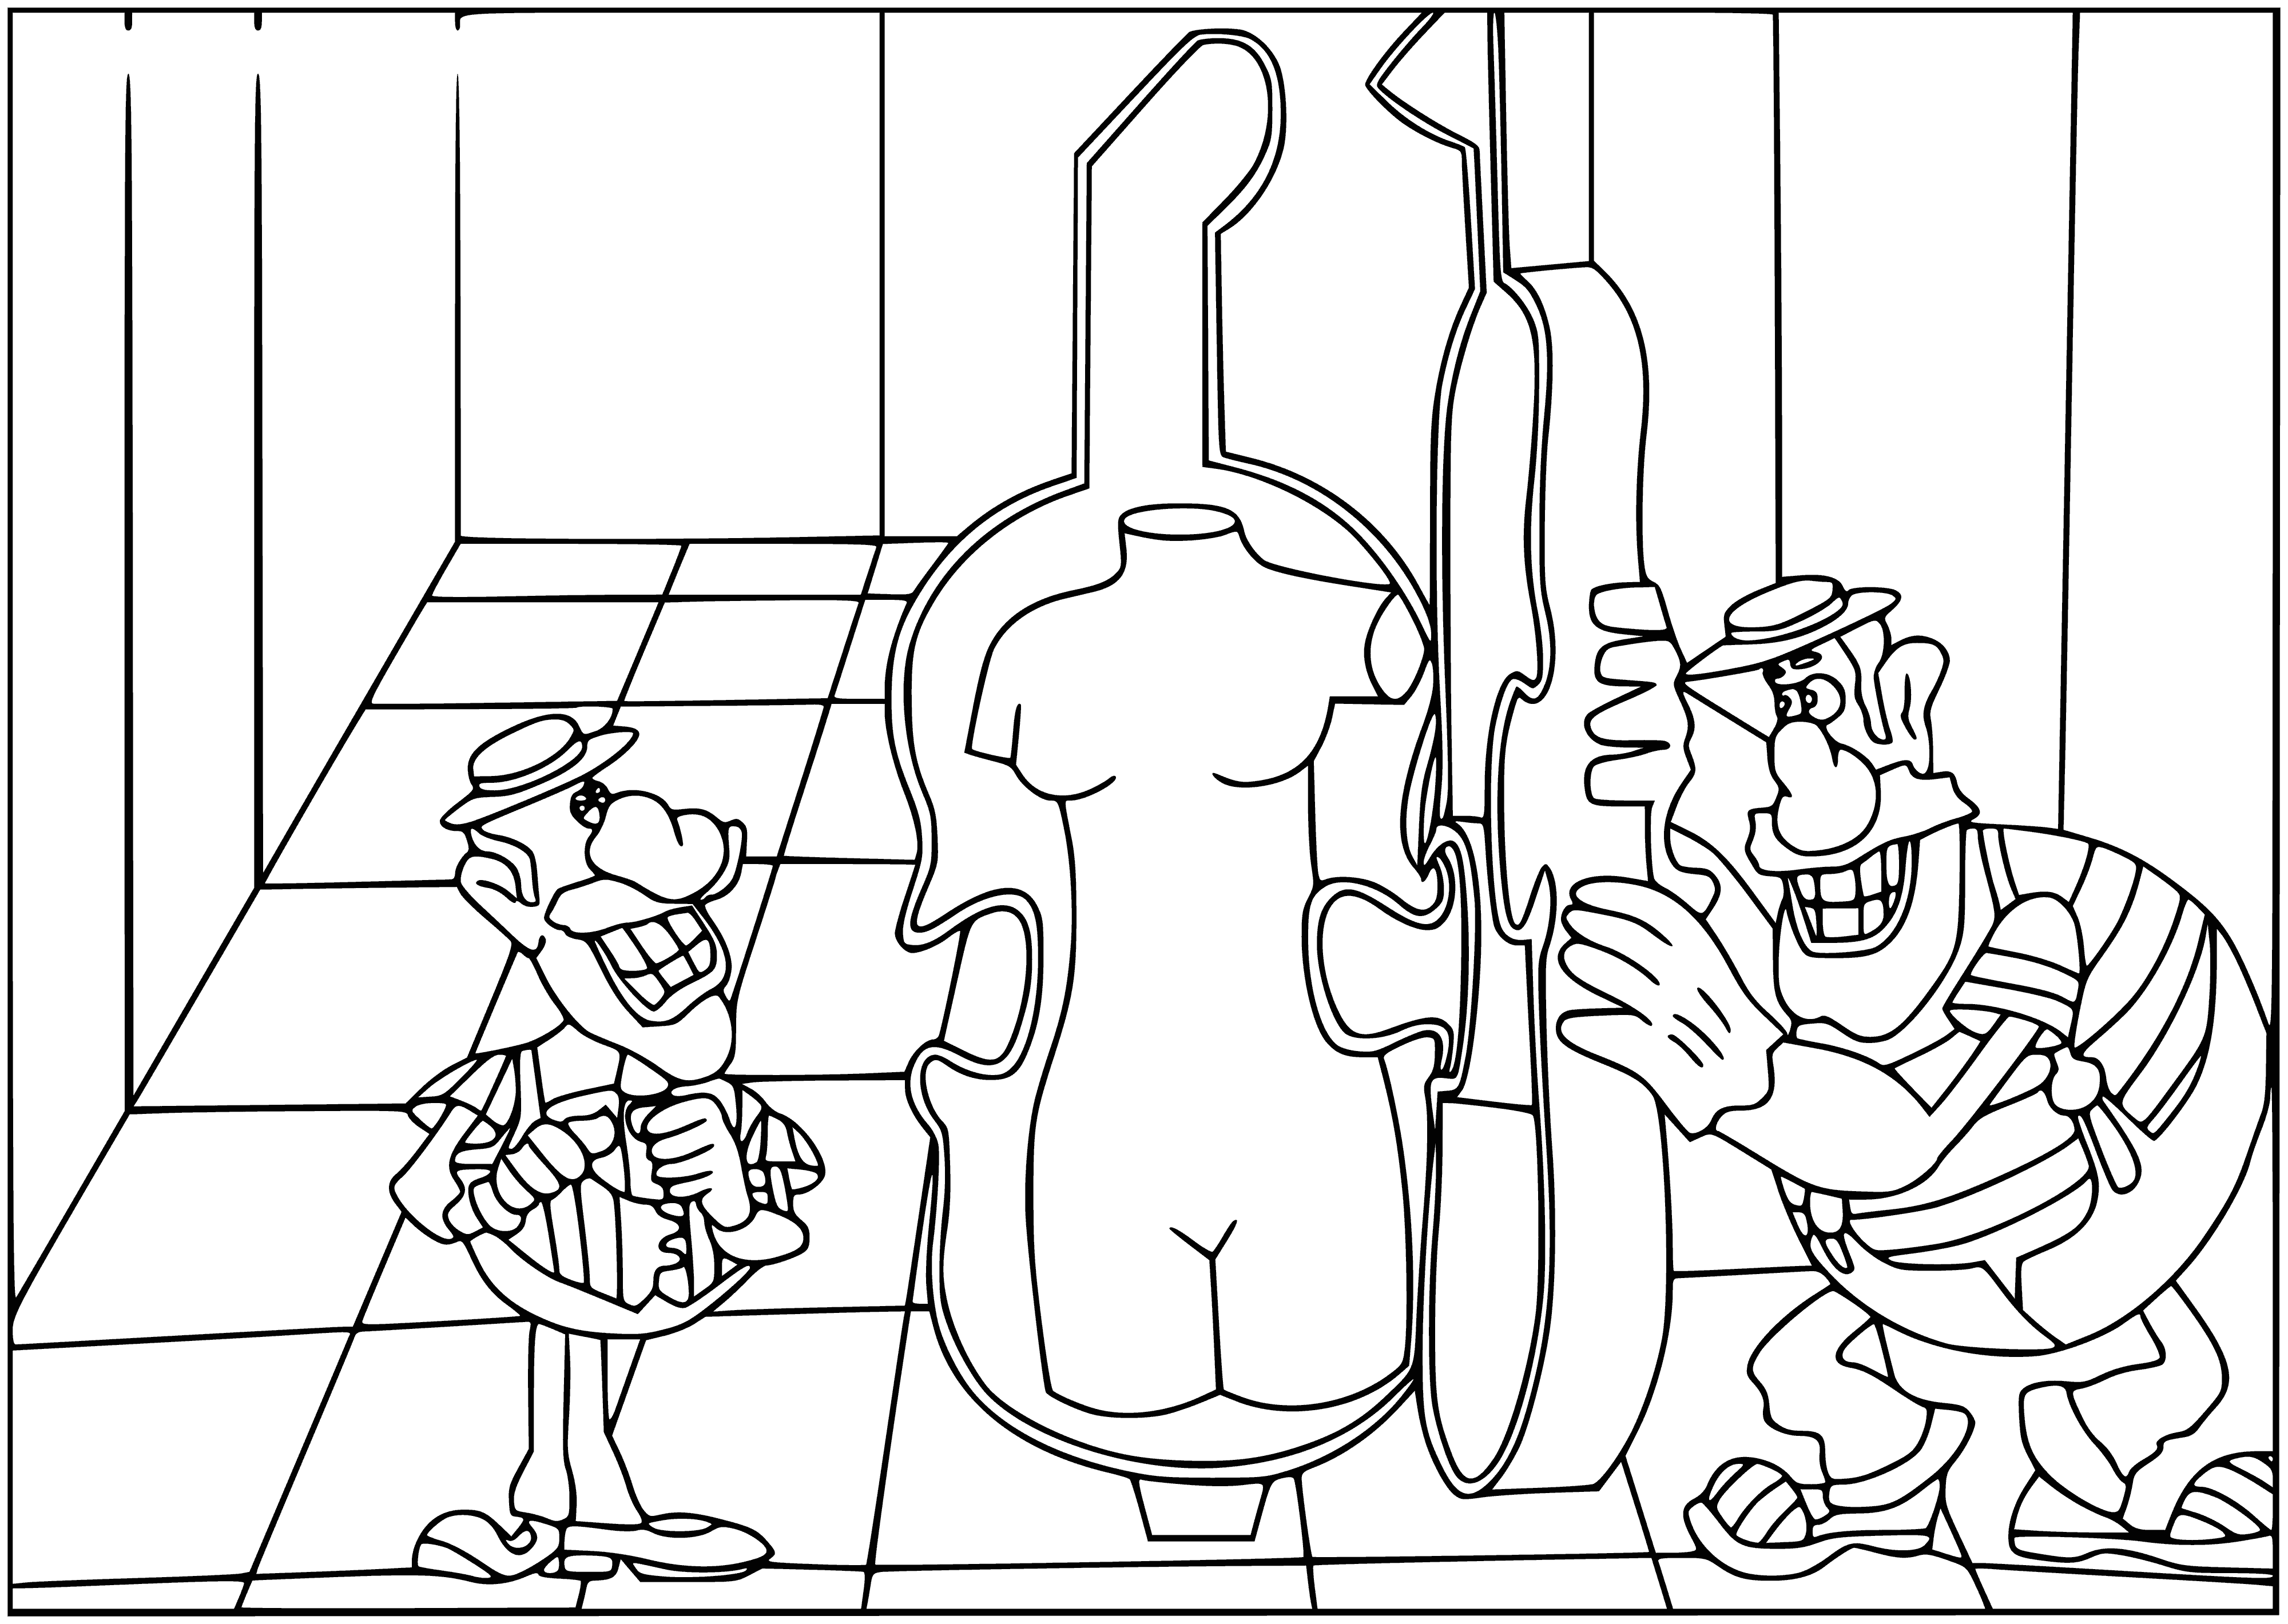 coloring page: Captain in uniform stands on ship deck, observant and prepared, surrounded by admiring onlookers.